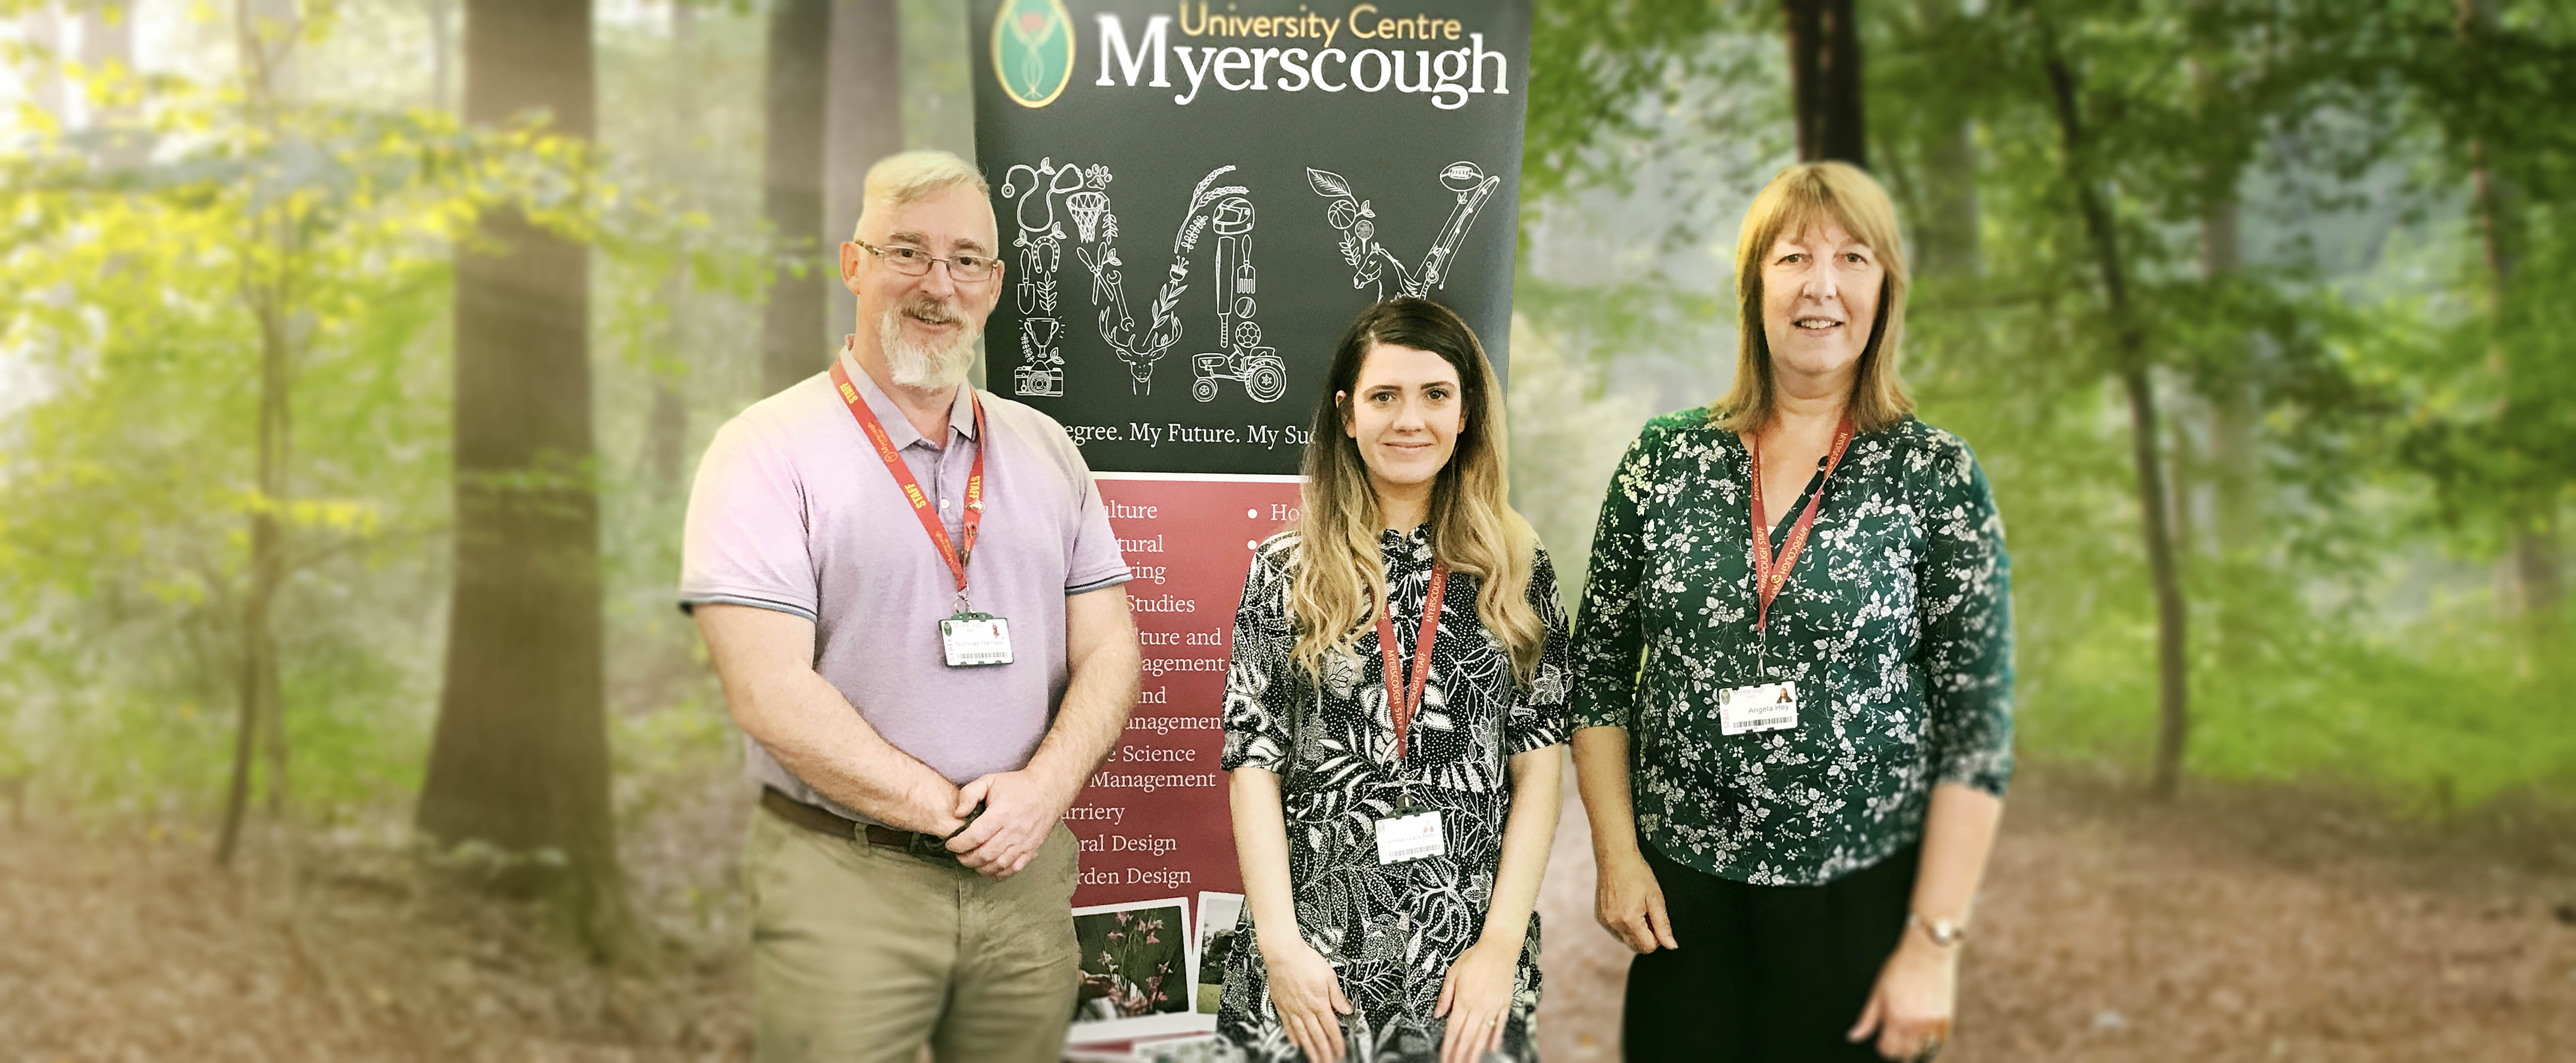 A Team photo of Nick, Amelia and Angela from University Centre Myerscough's Schools Team